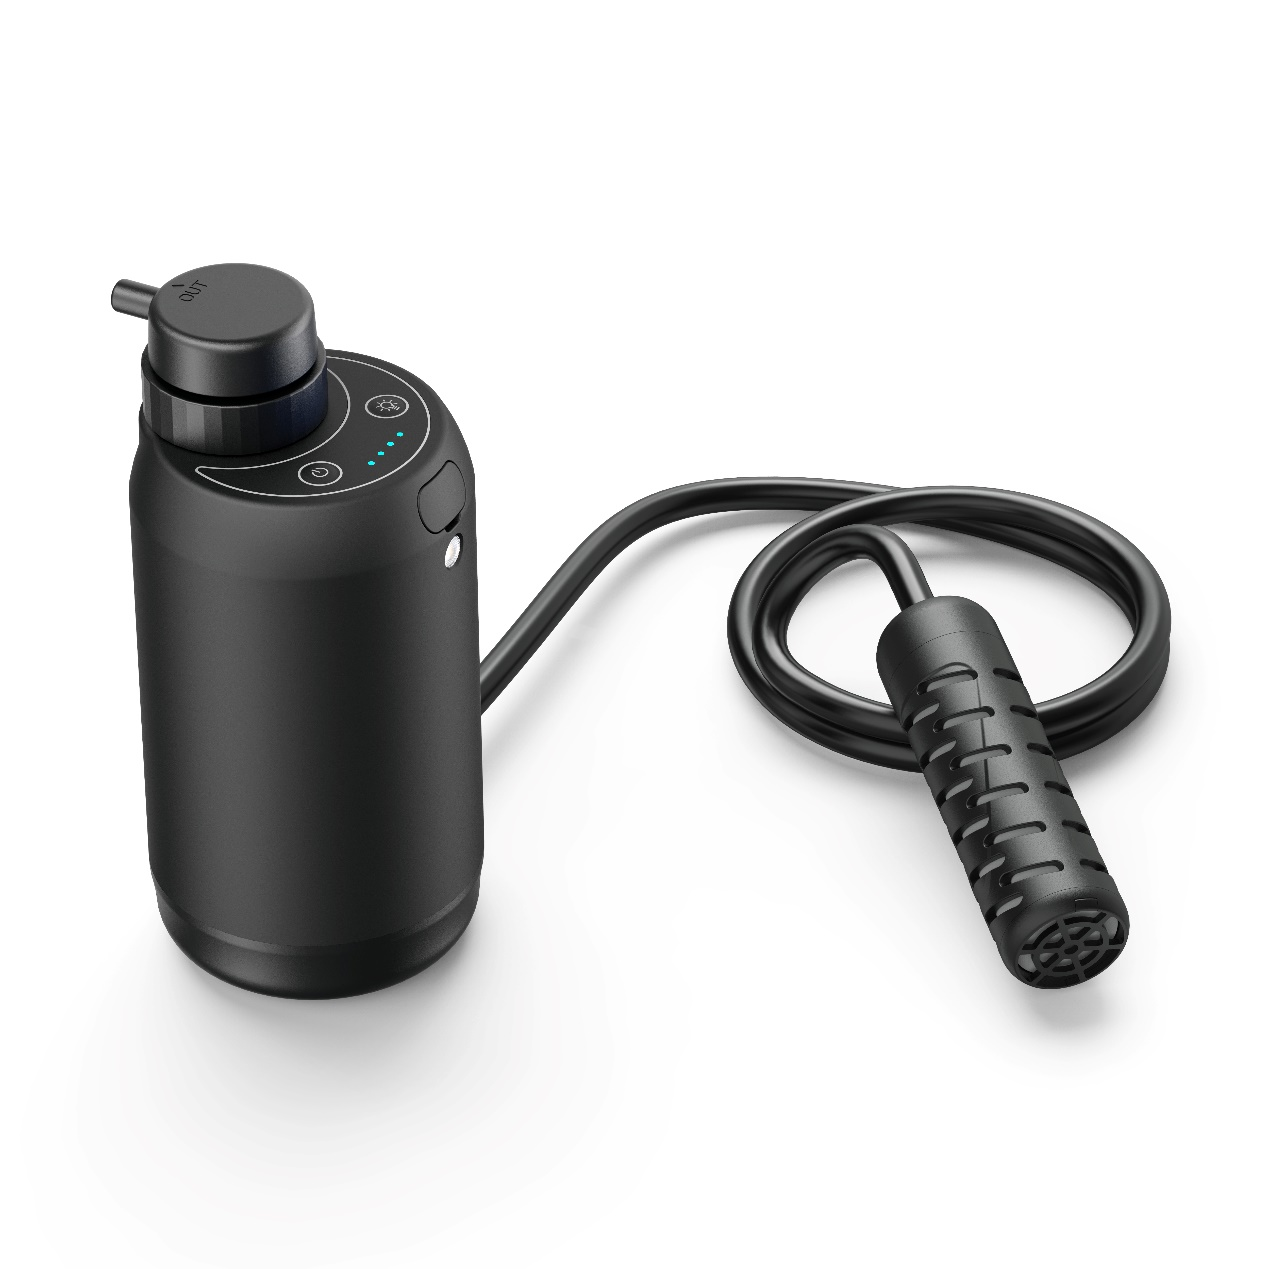 Introducing Greeshow Portable Water Filter with 5-Stage Filtration System For Outdoor Activities